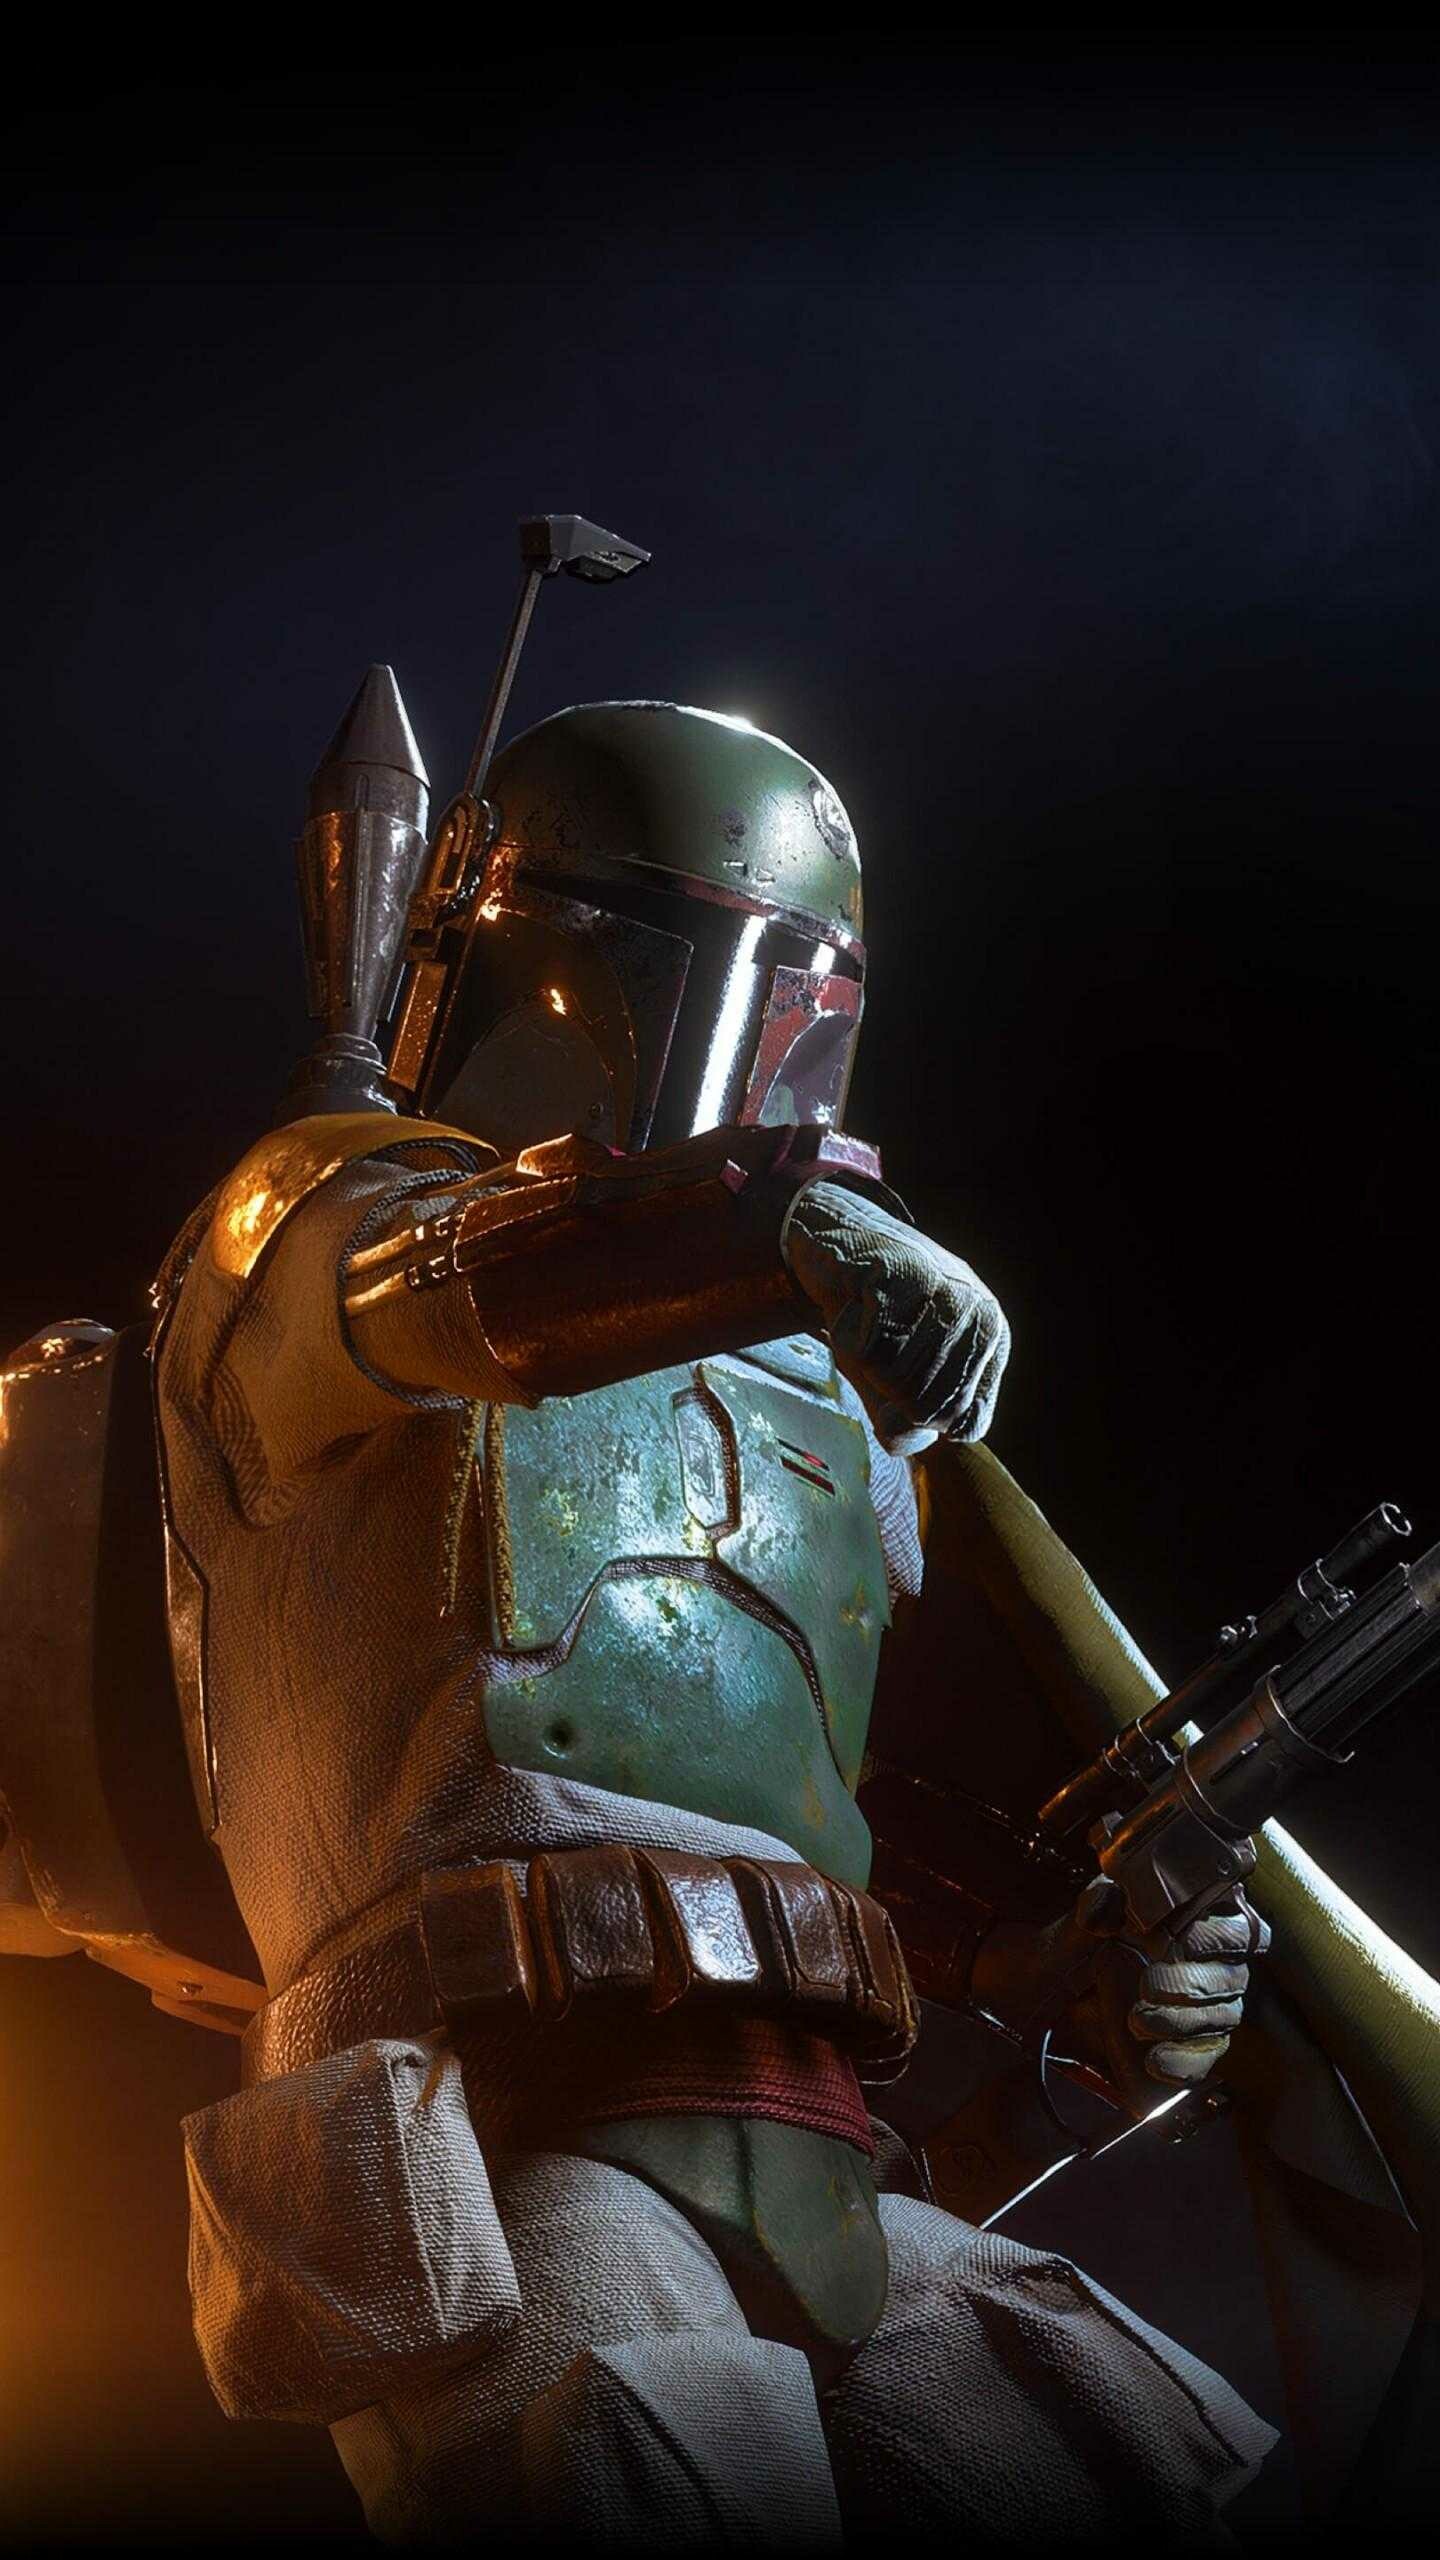 The Book of Boba Fett: Temuera Morrison's characters, An armored bounty hunter. 1440x2560 HD Wallpaper.